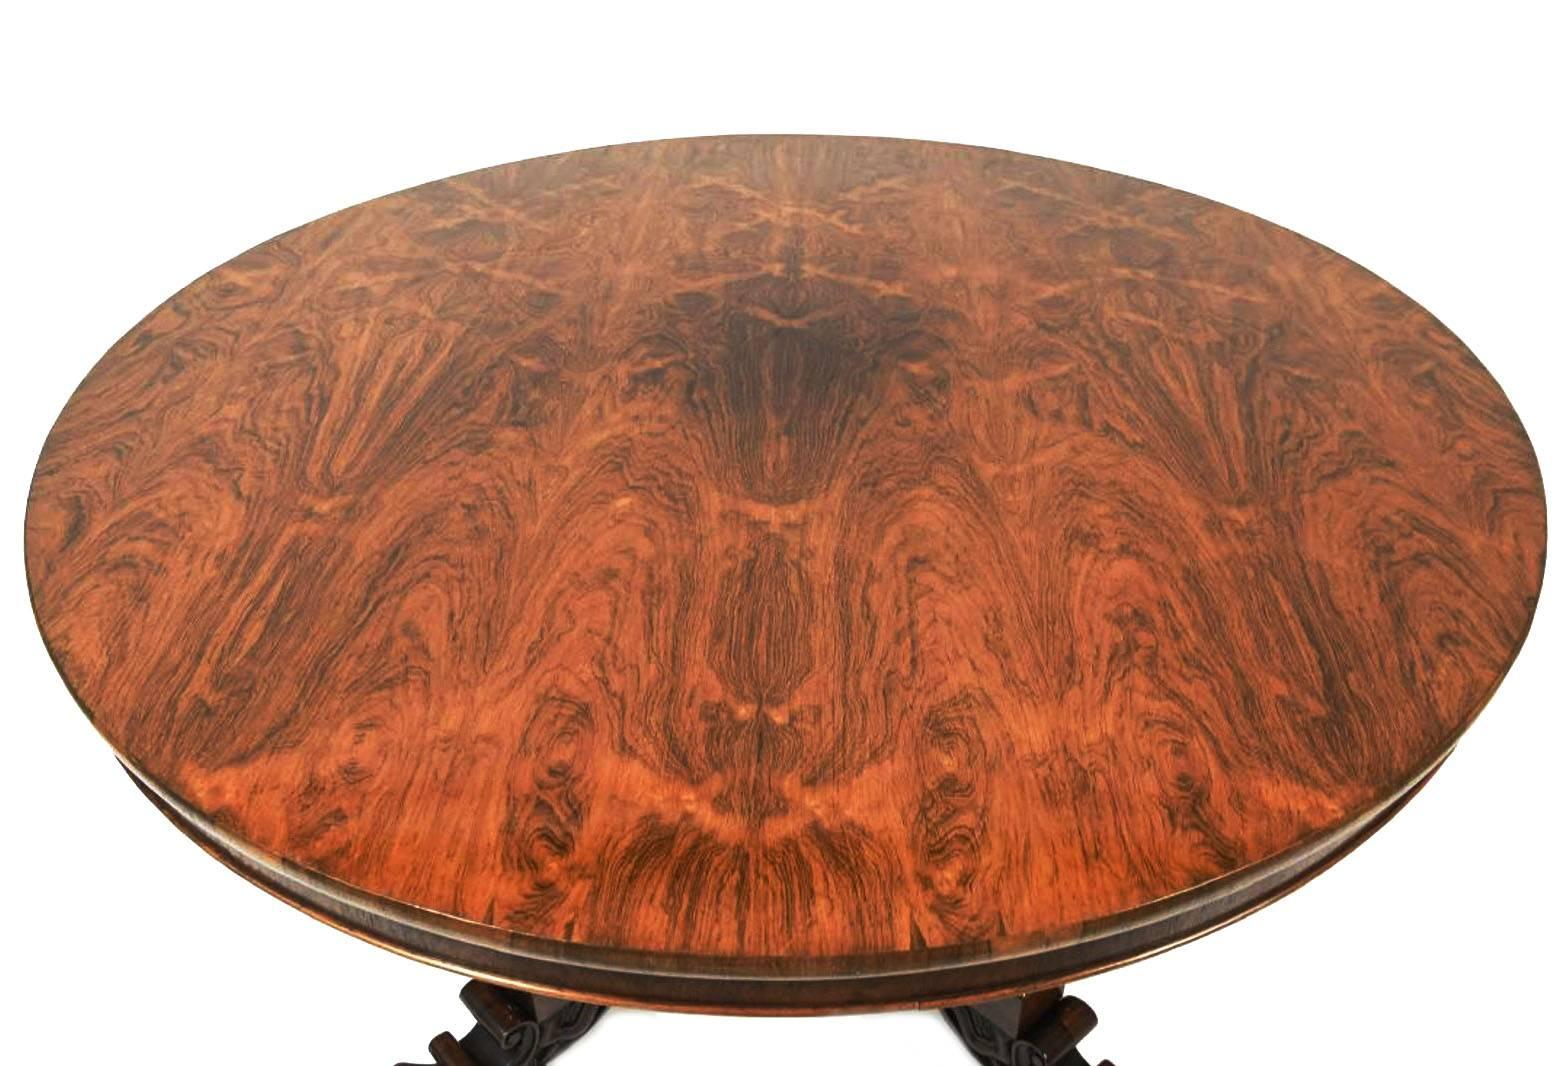 An exceptional round tilt-top table with mellowed rich rosewood of spectacular butterfly veneer. The slab top rests on a narrow crossbanded drum and is supported by an exuberant carved pedestal base with thickly modeled petals and gadrooned base.